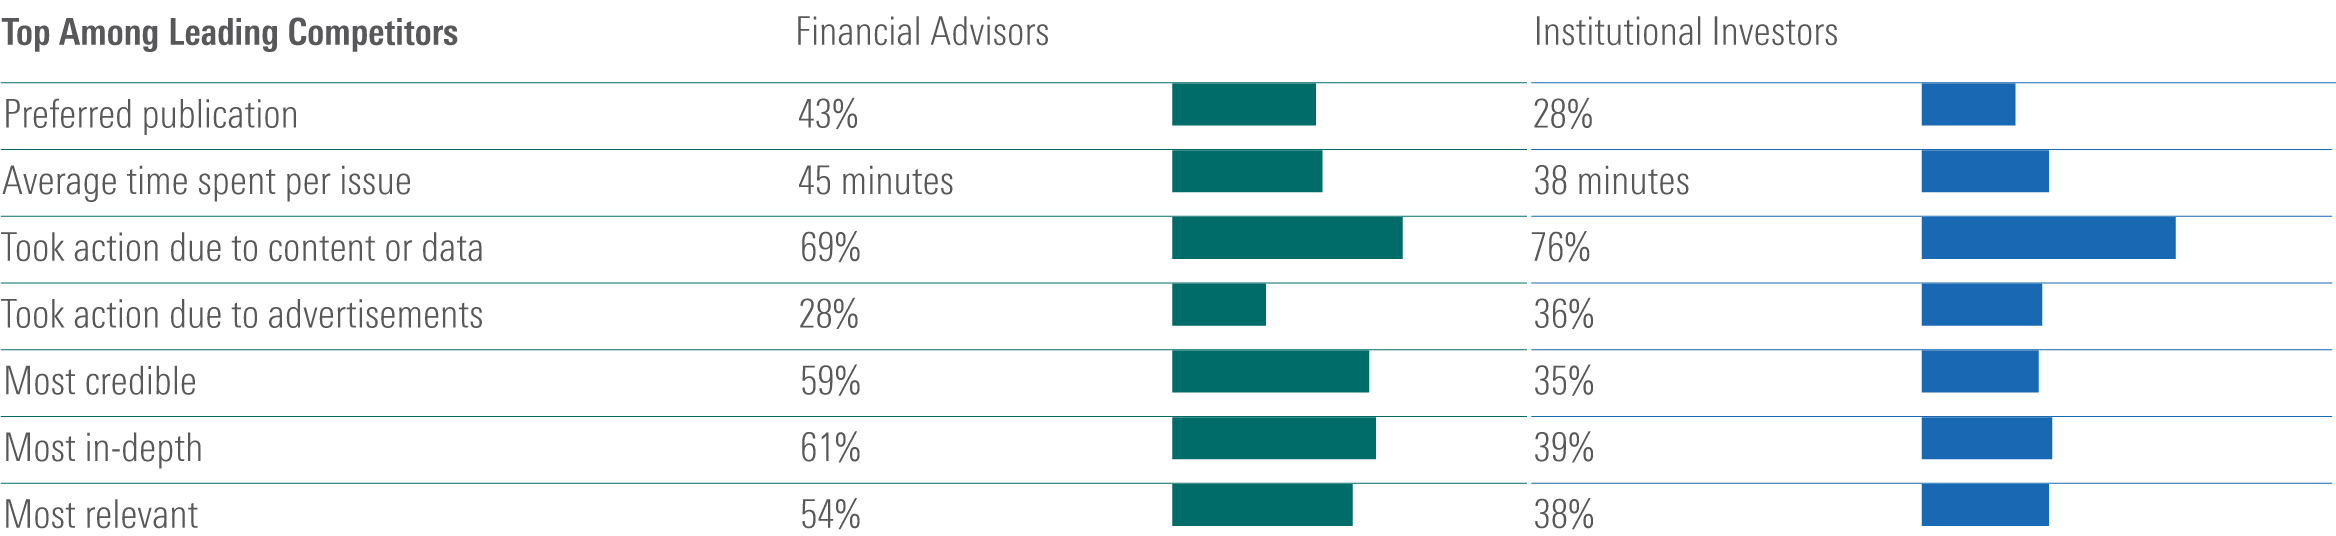 Top Among Leading Competitors; Financial Advisors; Preferred publication 43%; Average time spent per issue 45 minutes; Took action due to content or data 69%; Took action due to advertisements 28%; Most credible 59%; Most in-depth 61%; Most relevant 54%;  Top Among Leading Competitors; Institutional Investors; Preferred publication 28%; Average time spent per issue 38 minutes; Took action due to content or data 76%; Took action due to advertisements 36%; Most credible 35%; Most in-depth 39%; Most relevant 38%